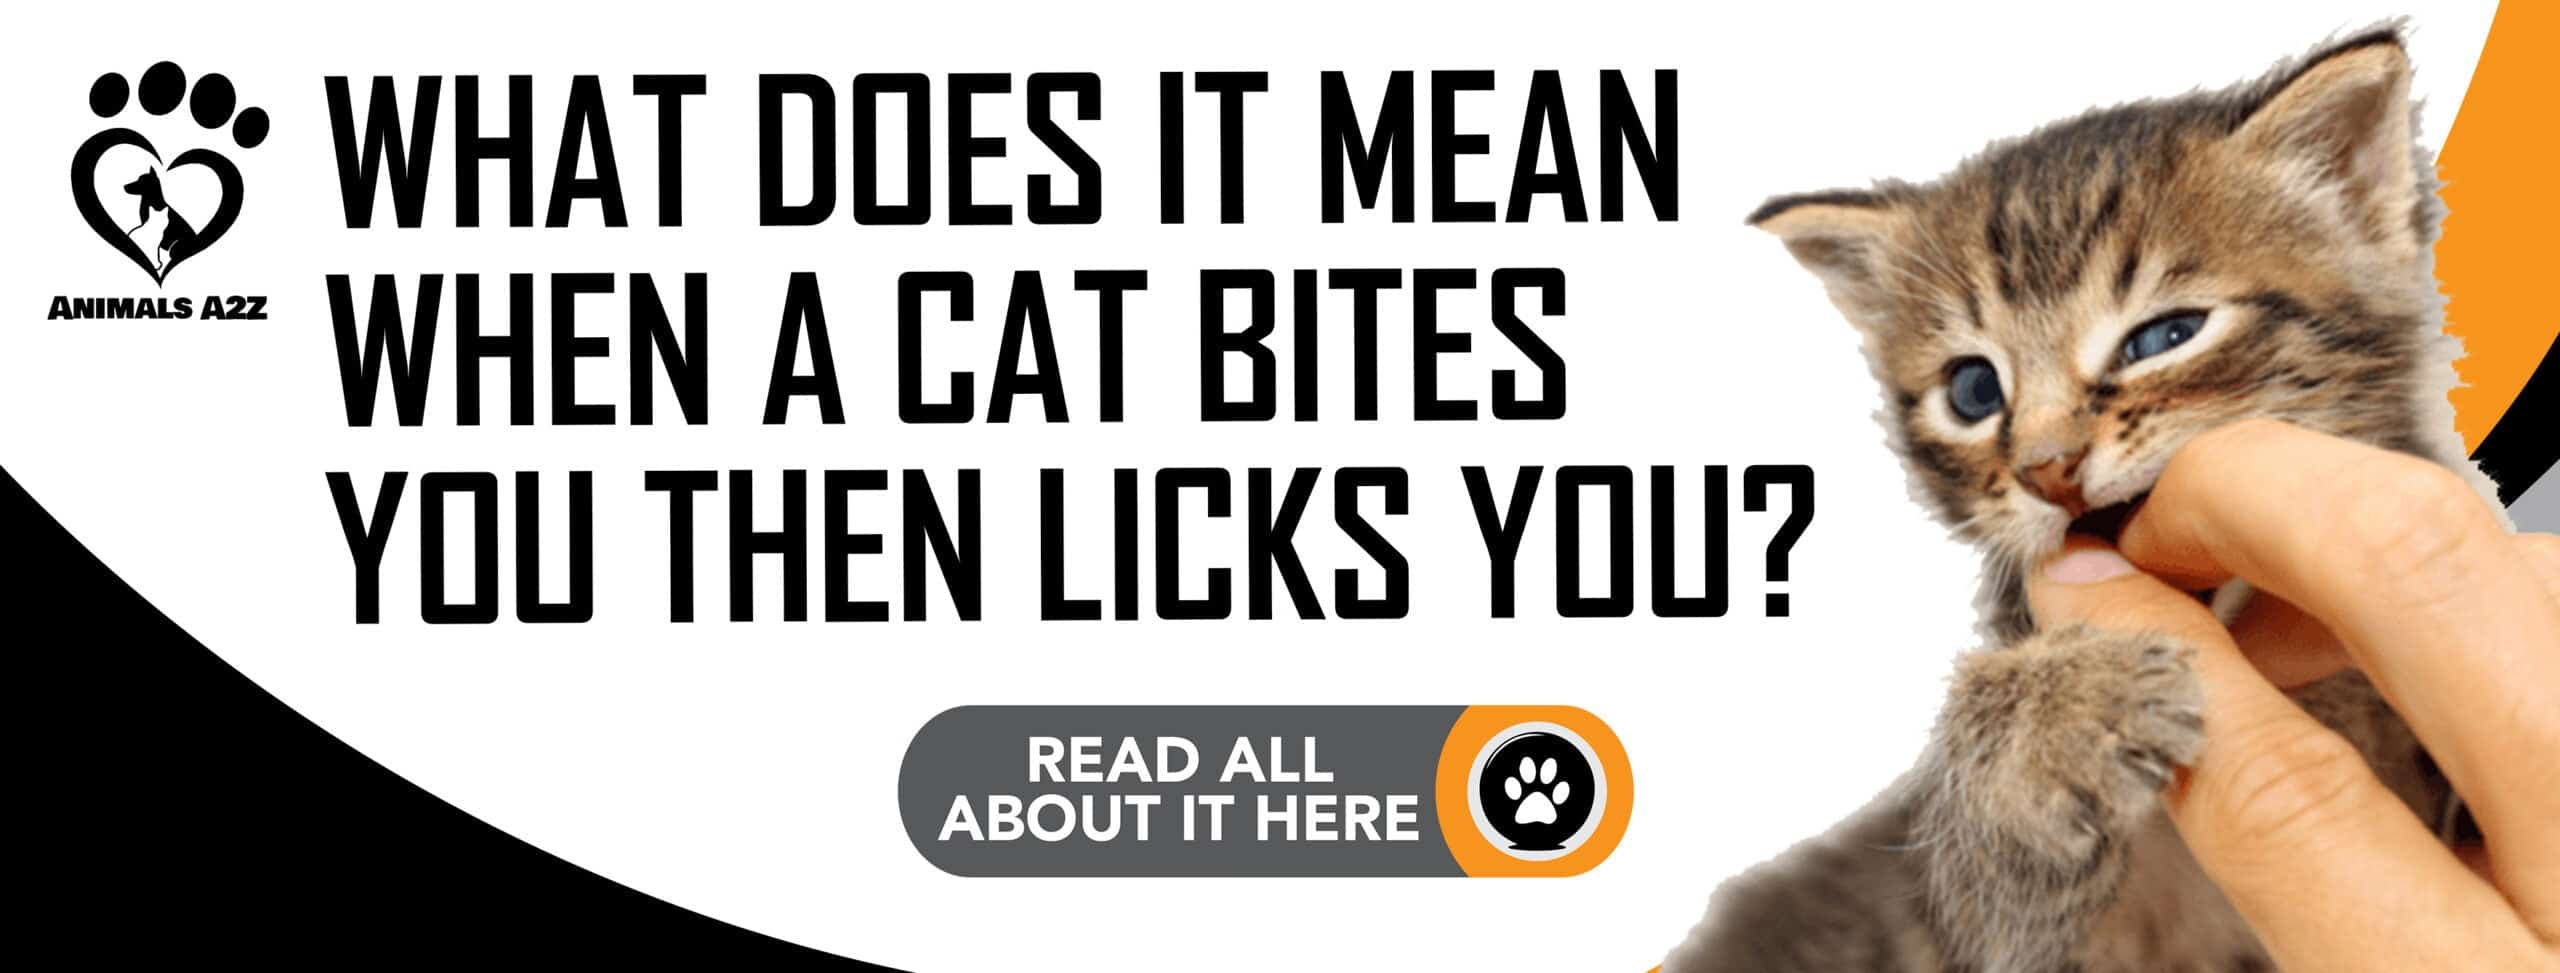 What does it mean when a cat bites you then licks you